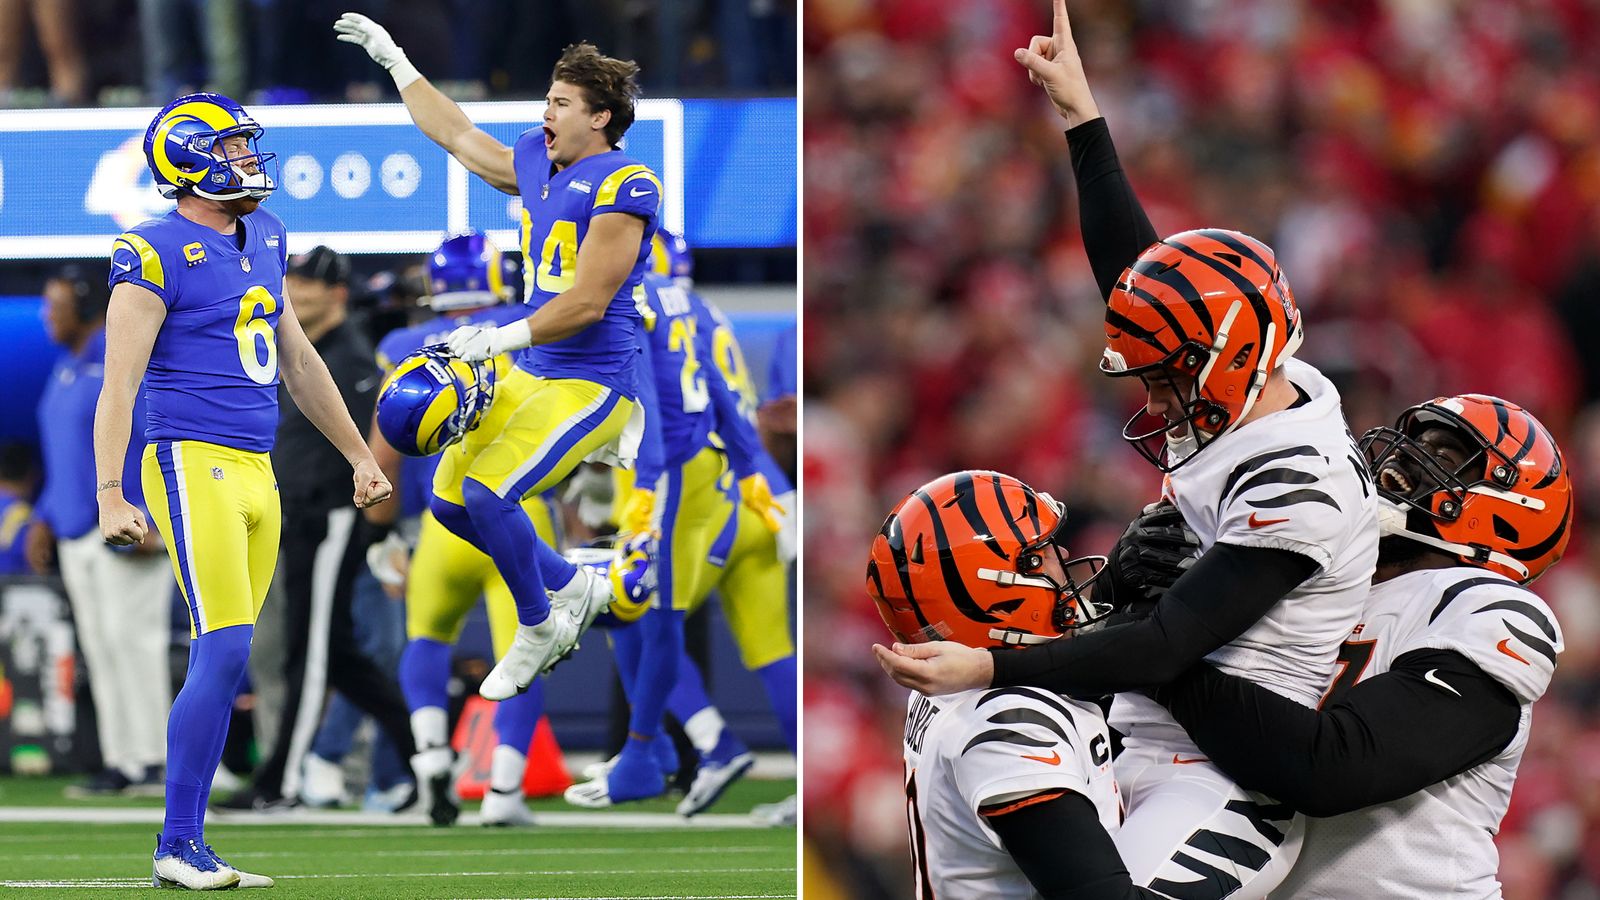 Super Bowl 2022 final score: Rams beat Bengals to win the NFL